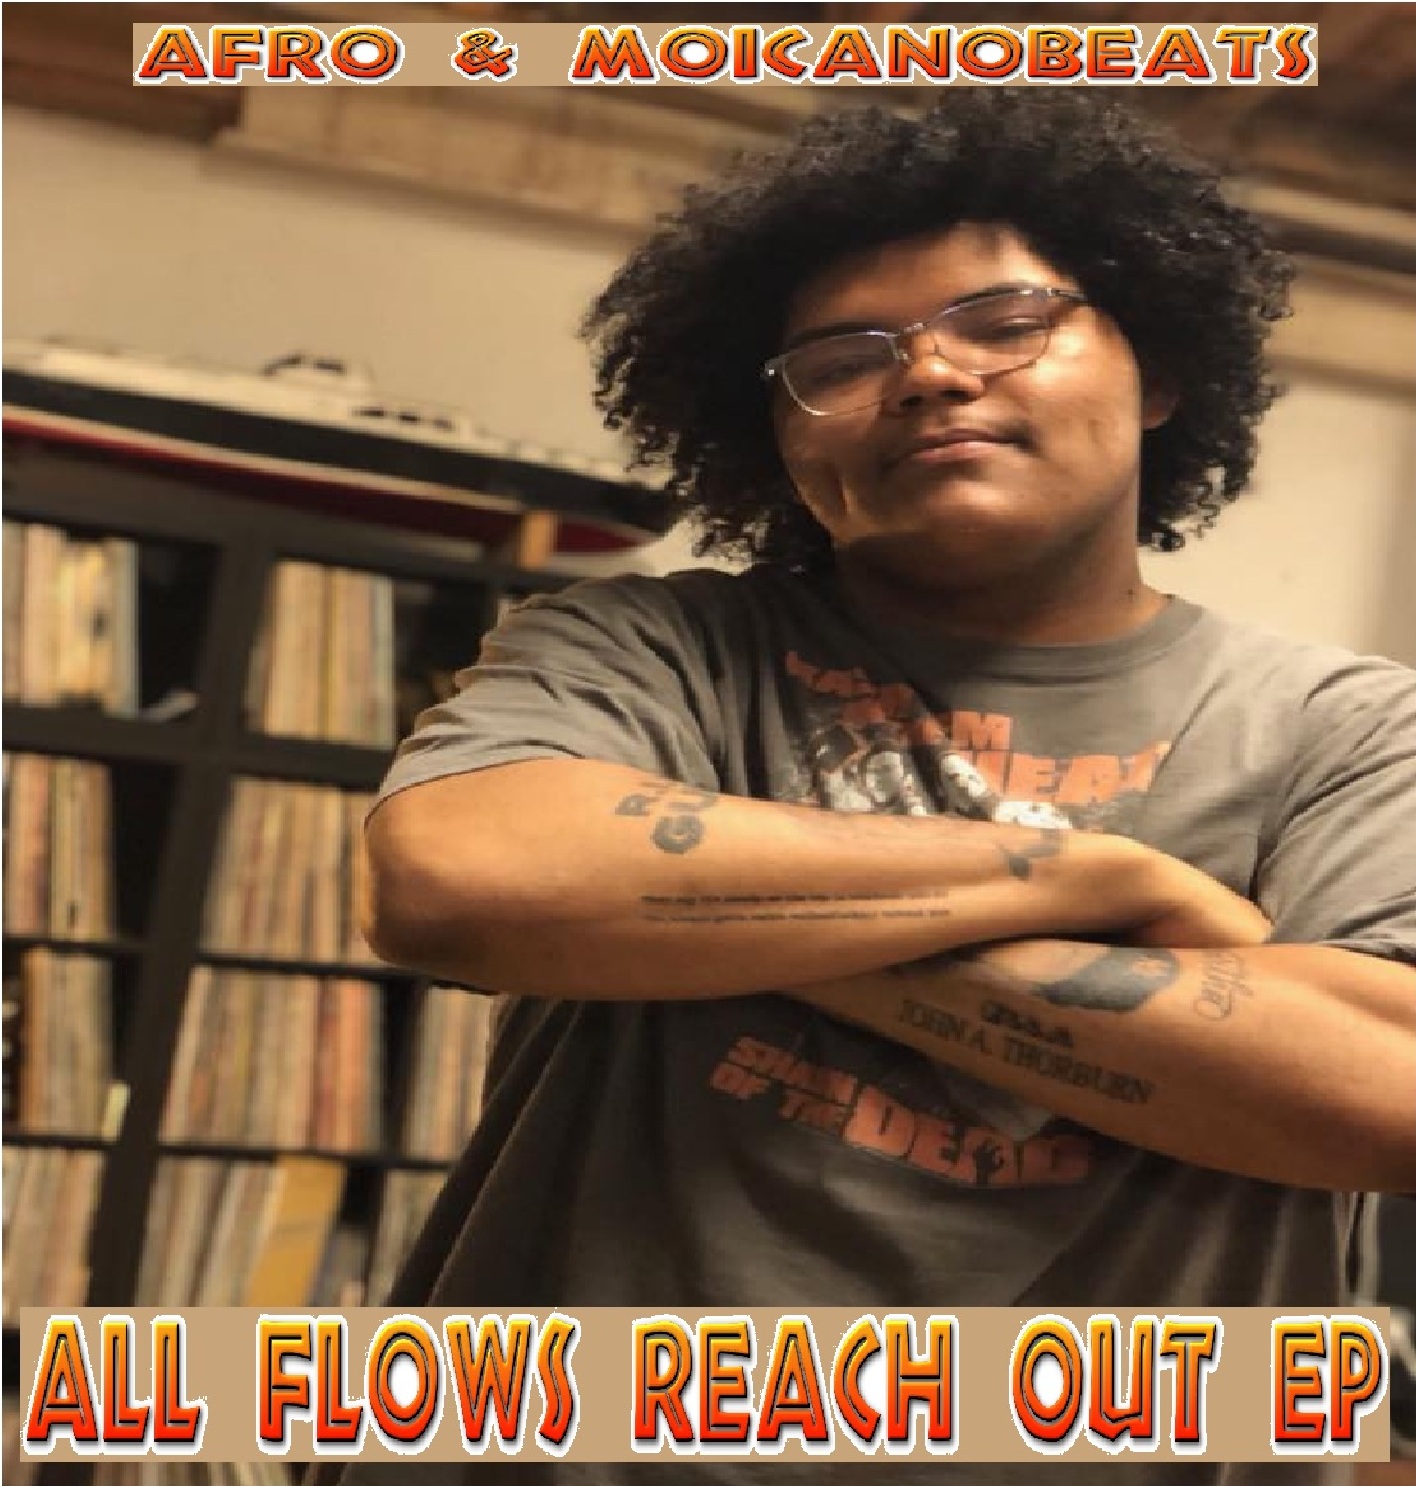 AFRO & MoicanoBeats - All Flows Reach Out EP (Autoproduzione 2019)